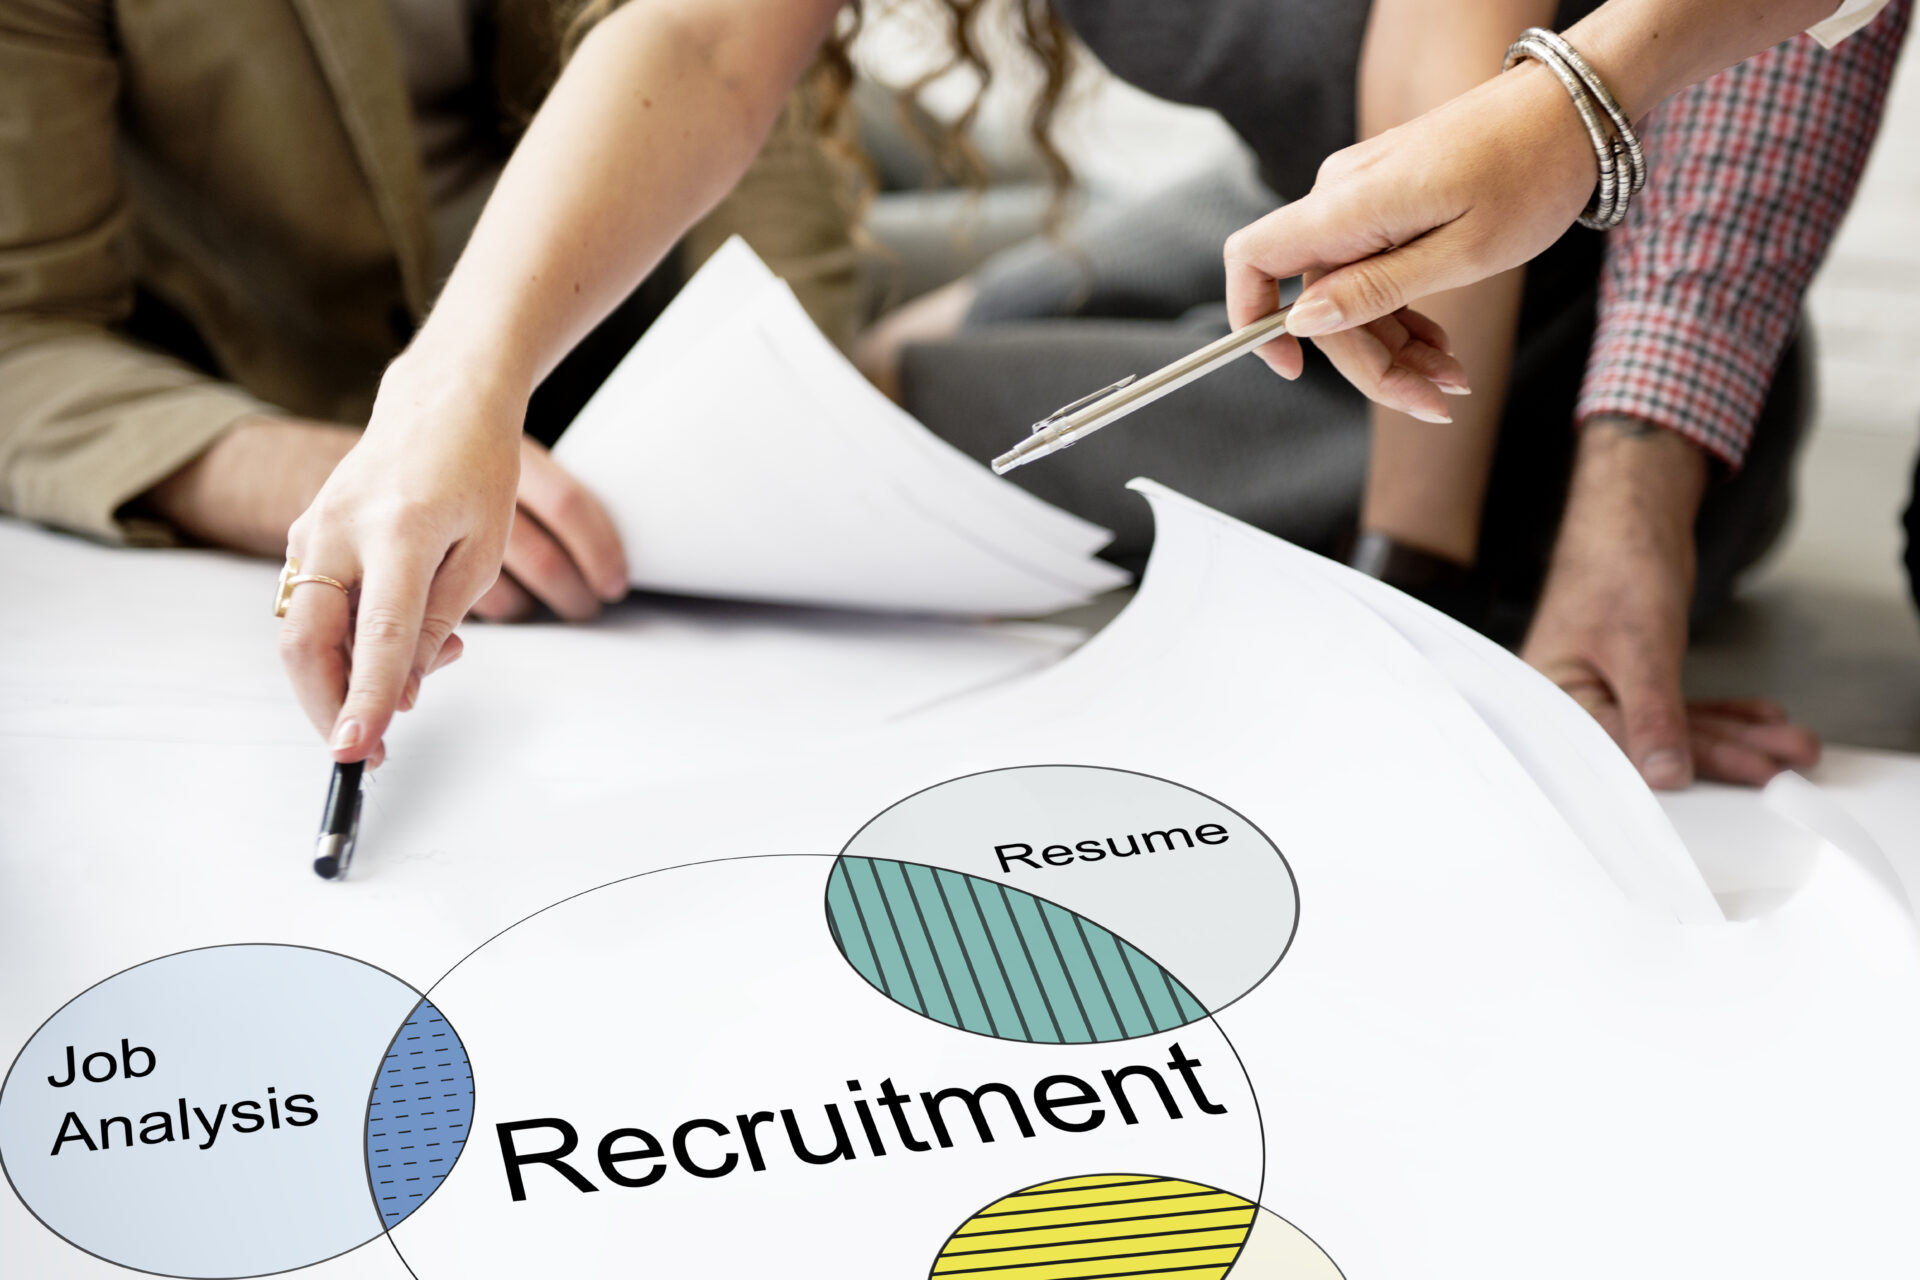 What Is Recruitment Process Outsourcing and How Can It Help You?